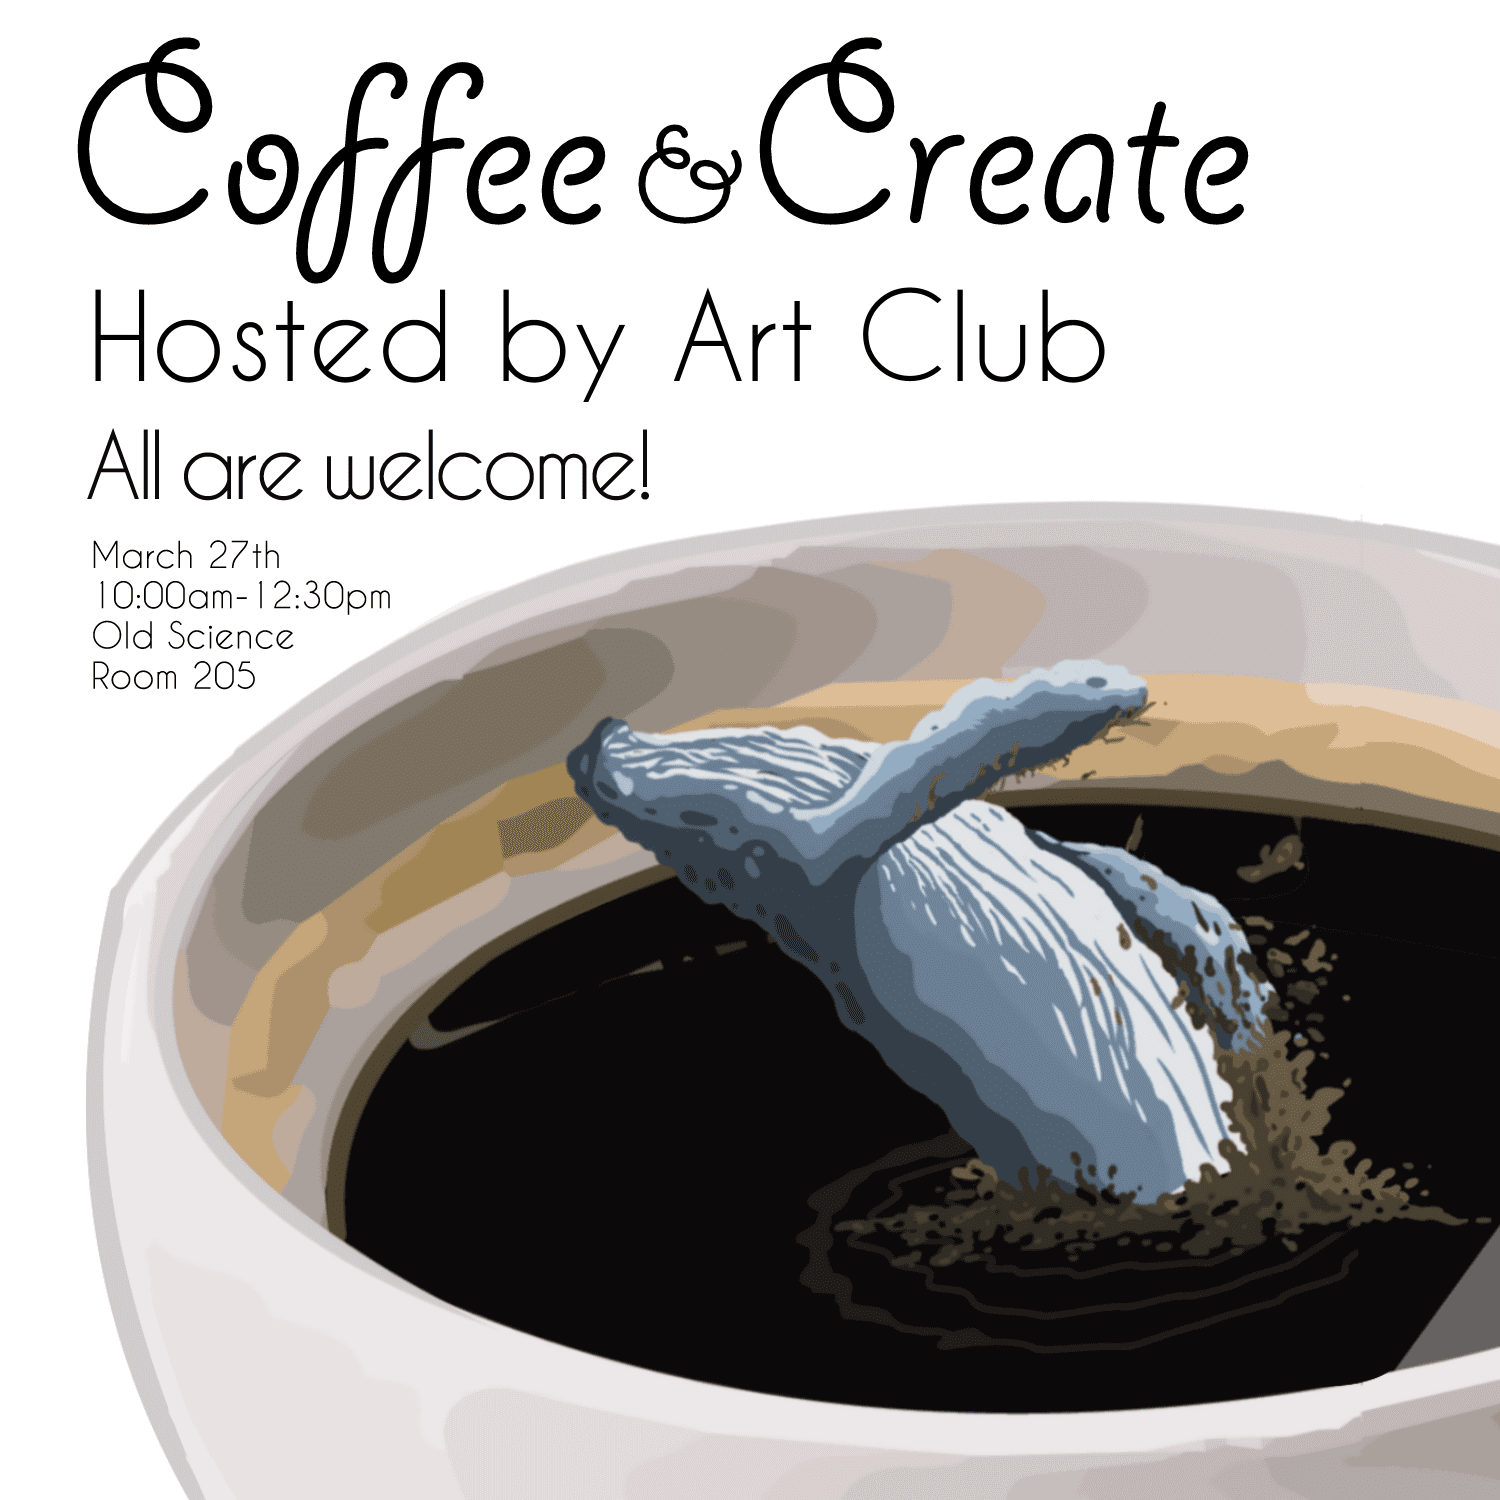 Grab some java and create some art on March 27